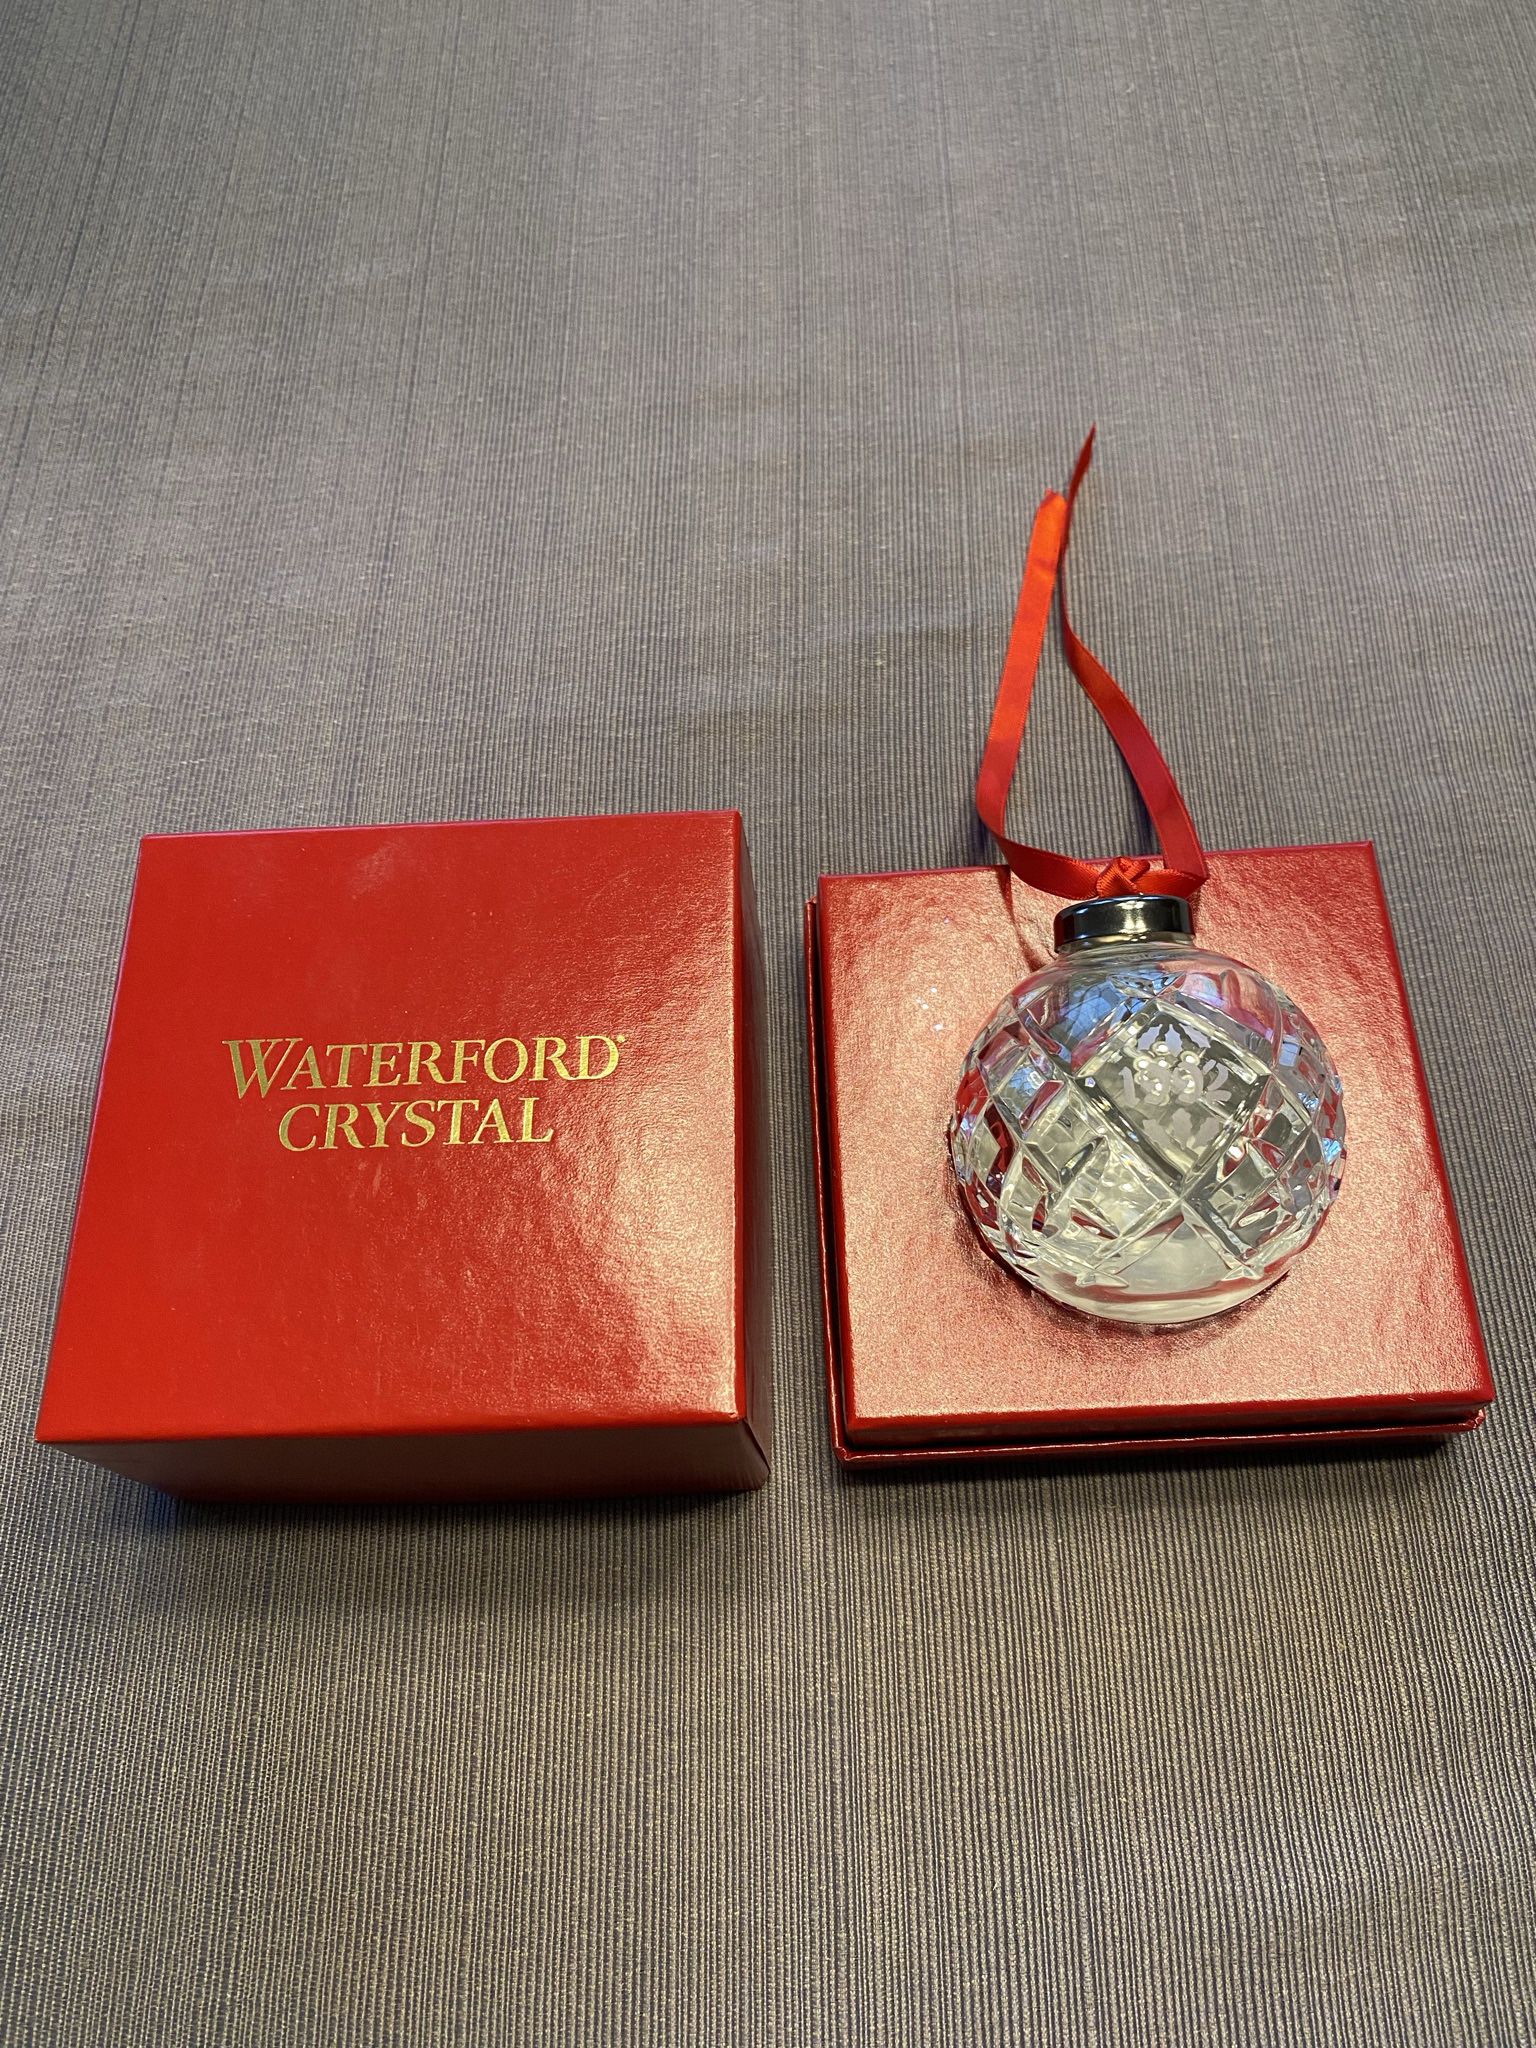 Genuine Waterford Crystal 1992 Annual Christmas Ball Ornament, mint condition in box